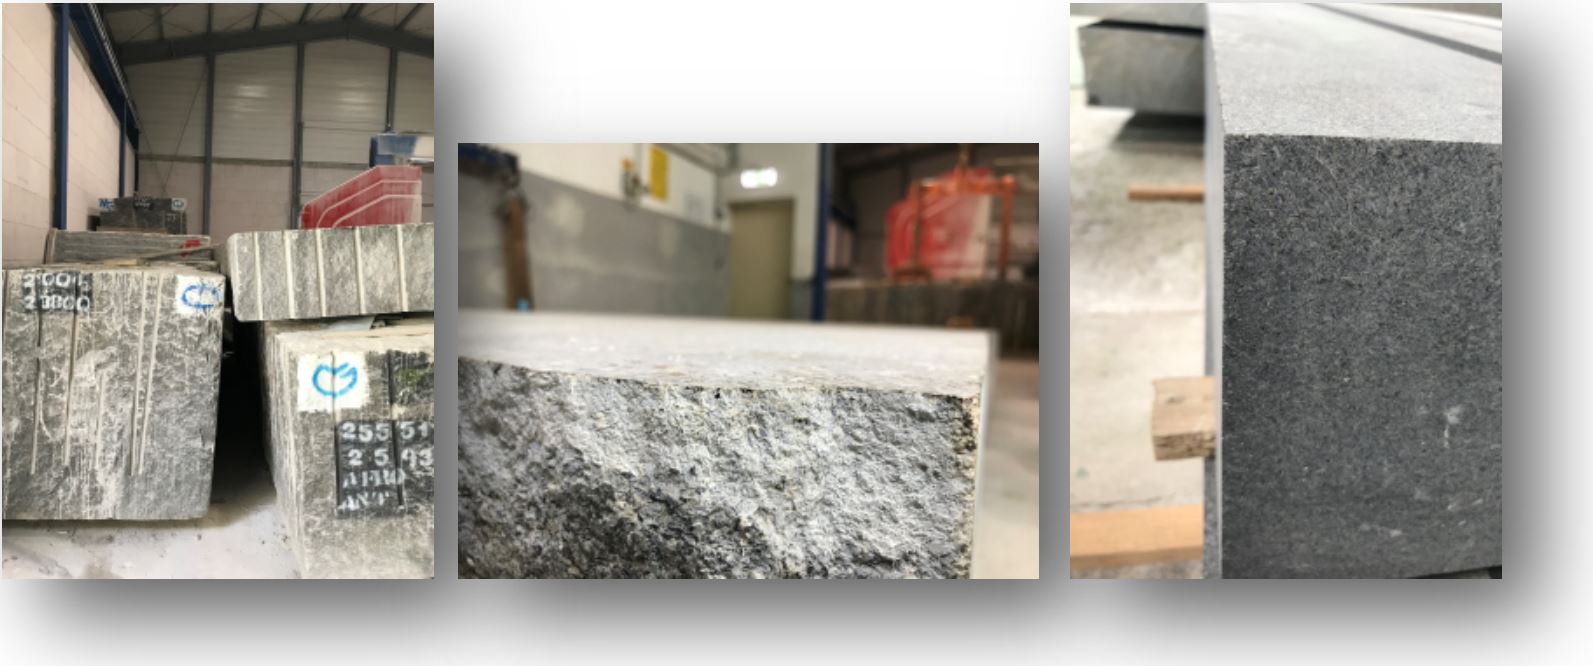 The progress of each granite block, from raw material to rough cuts ready to be hand lapped in Wiesthal.